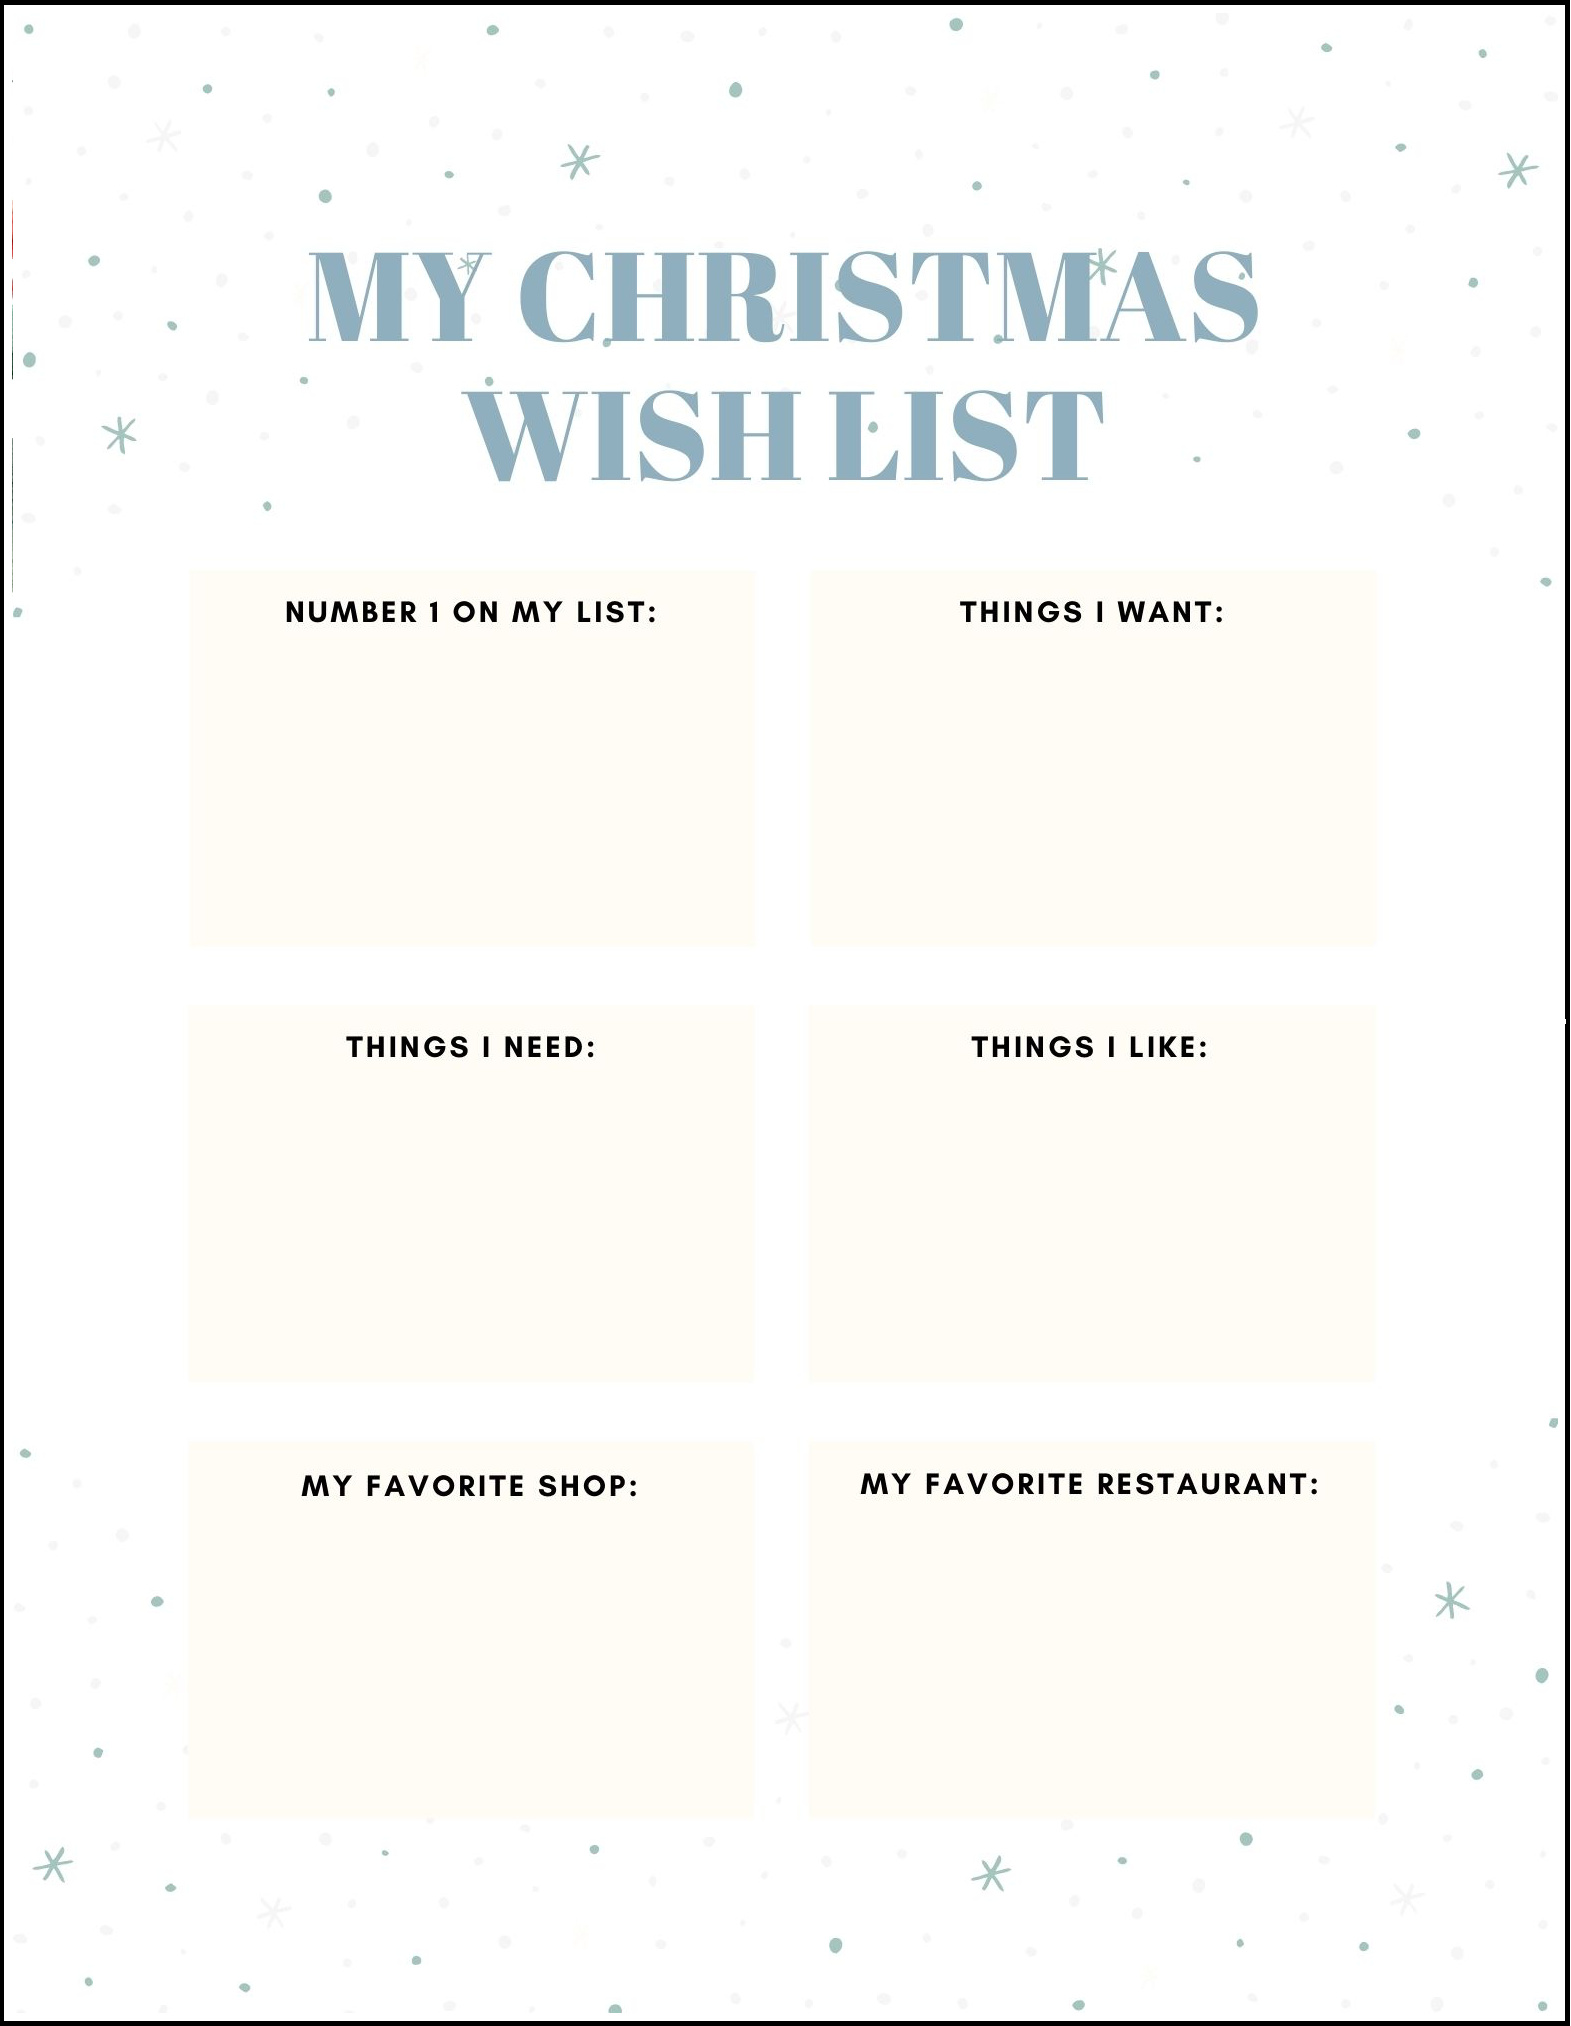 Christmas wish list with categories